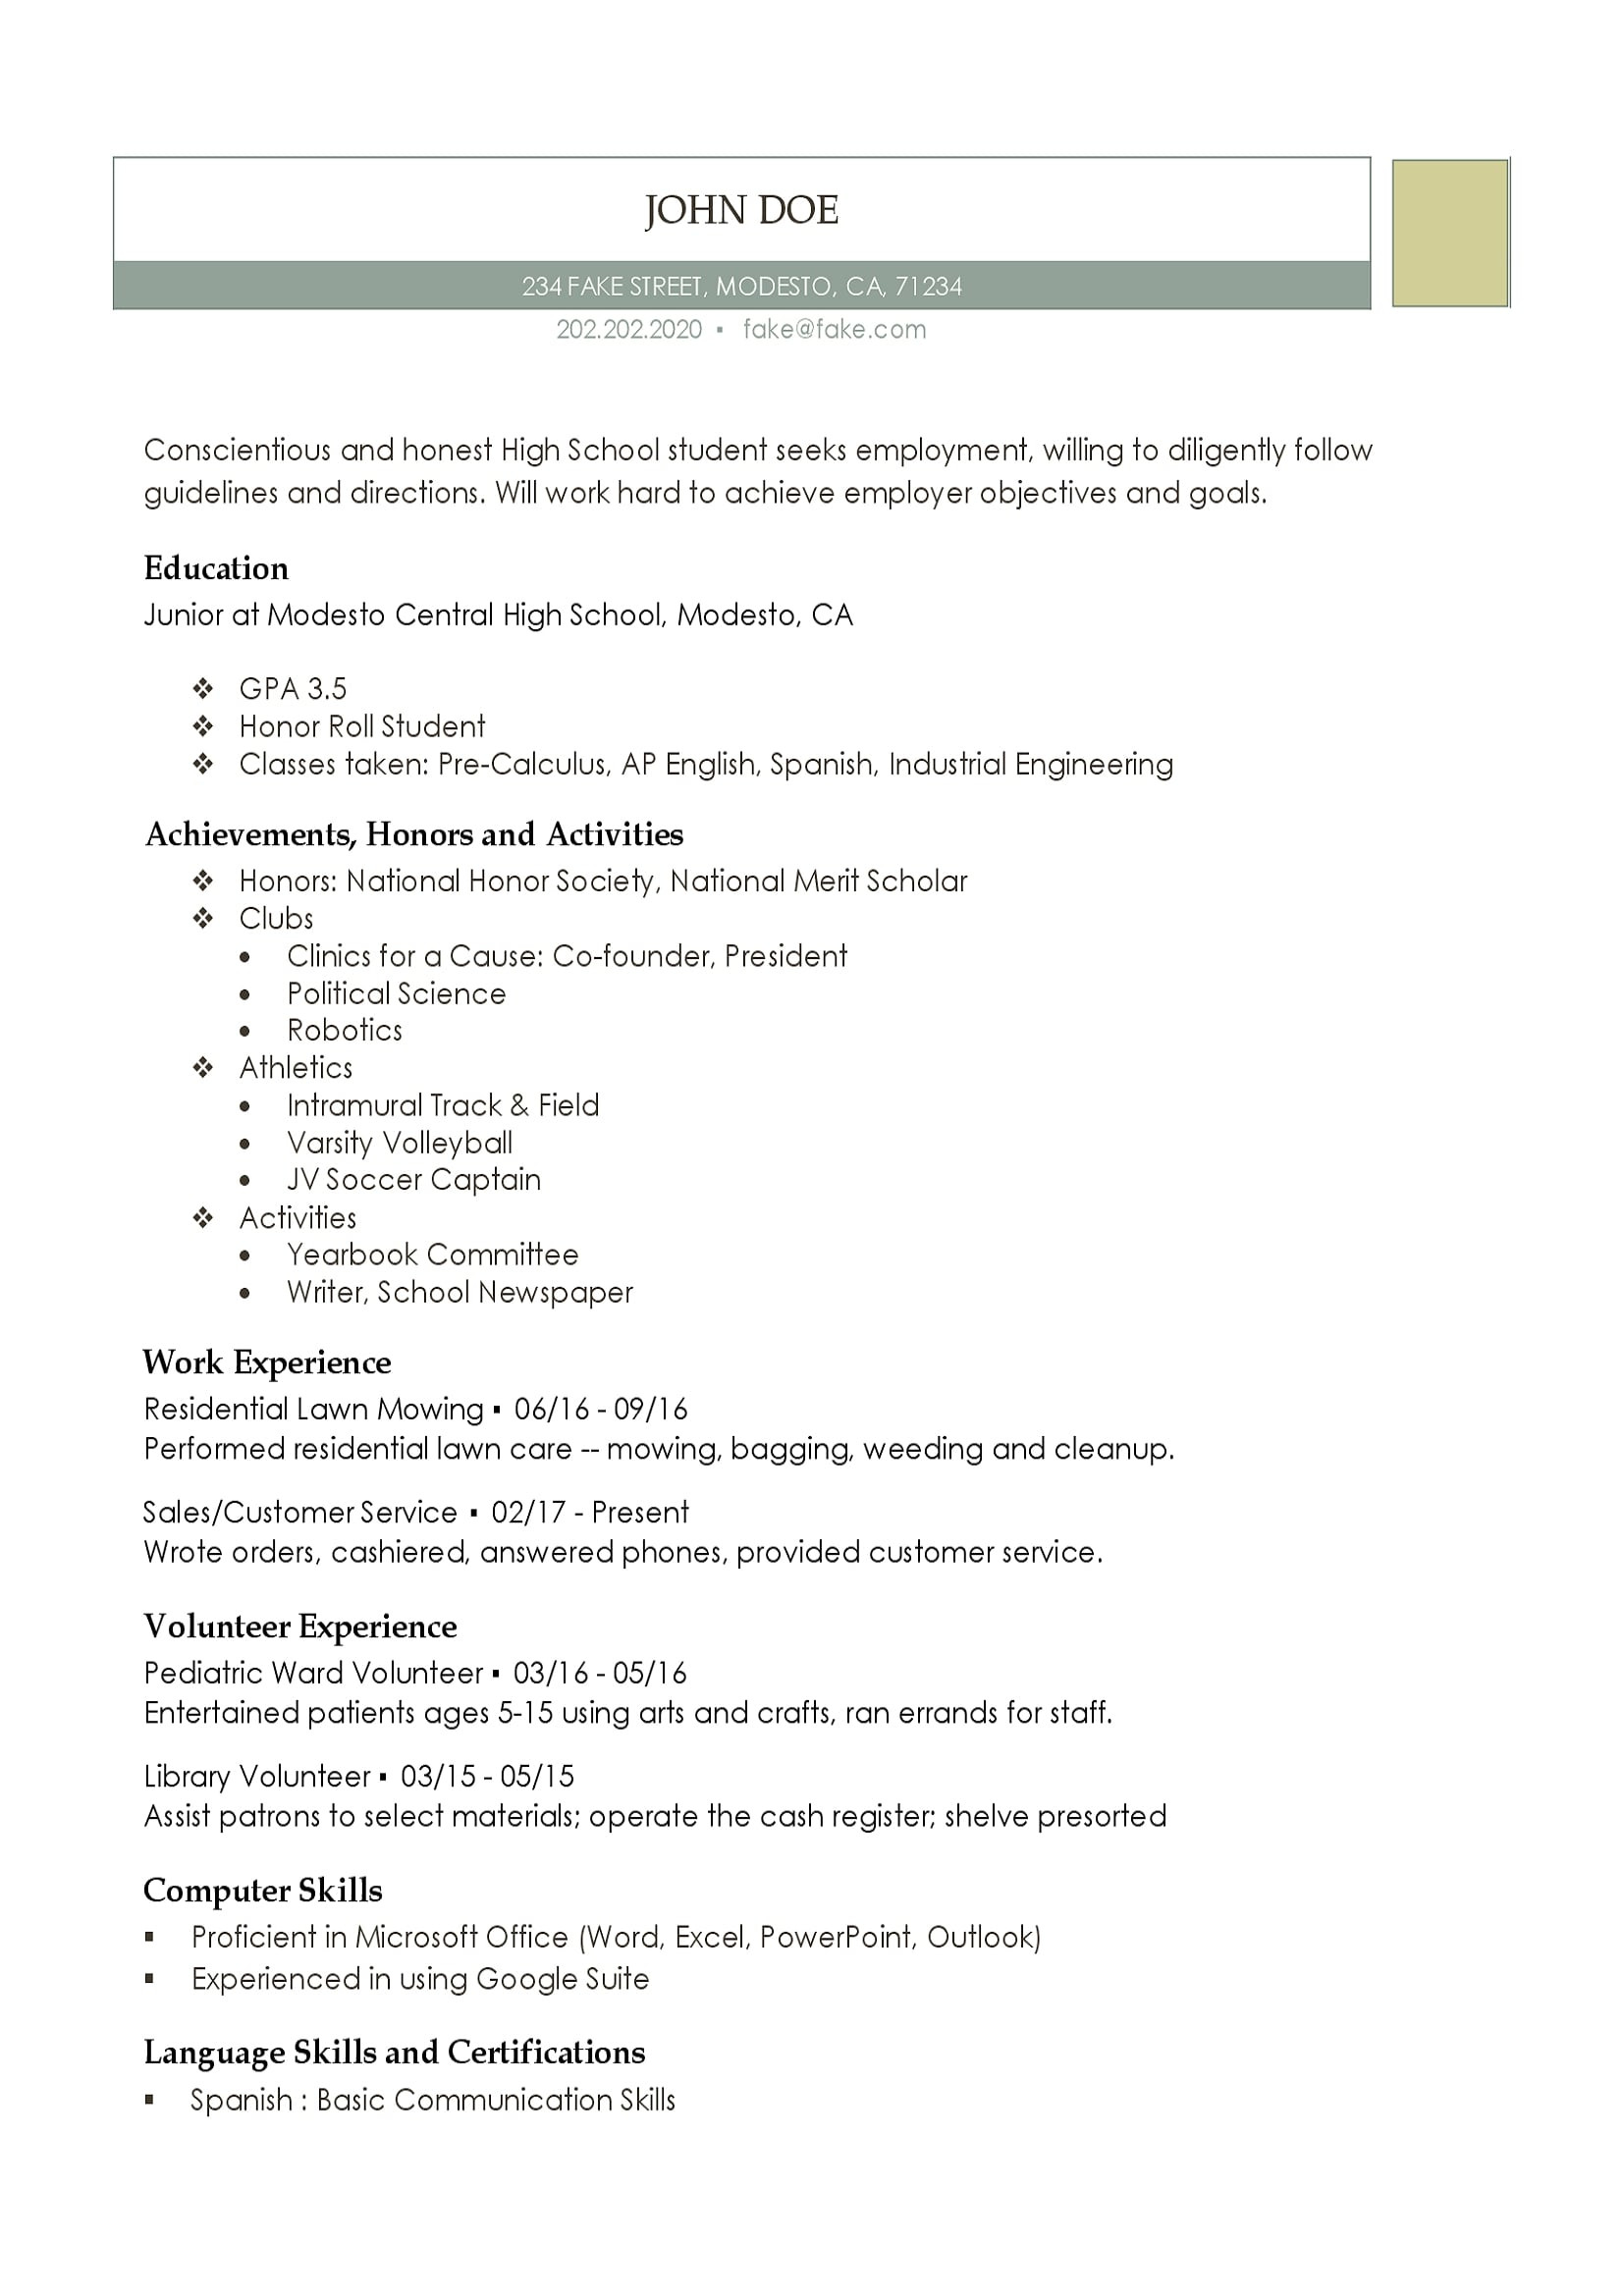 Resume Template for High School Students Australia High School Resume – Resume Templates for High School Students and …